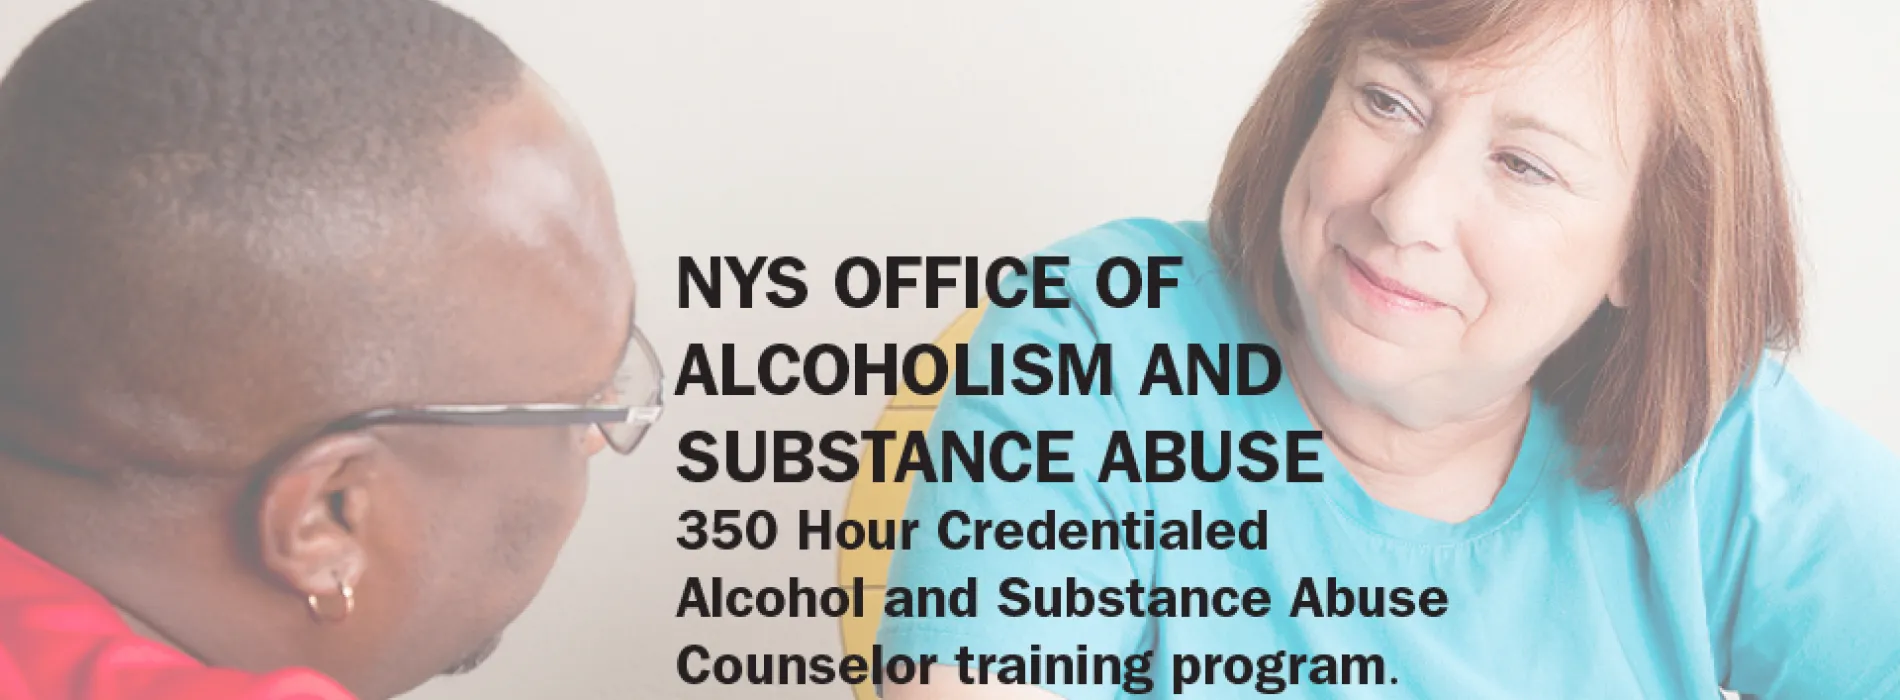 NYS Office of Alcoholism and Substance Abuse 350 hour credentialed Alcohol and Substance Abuse Counselor training program